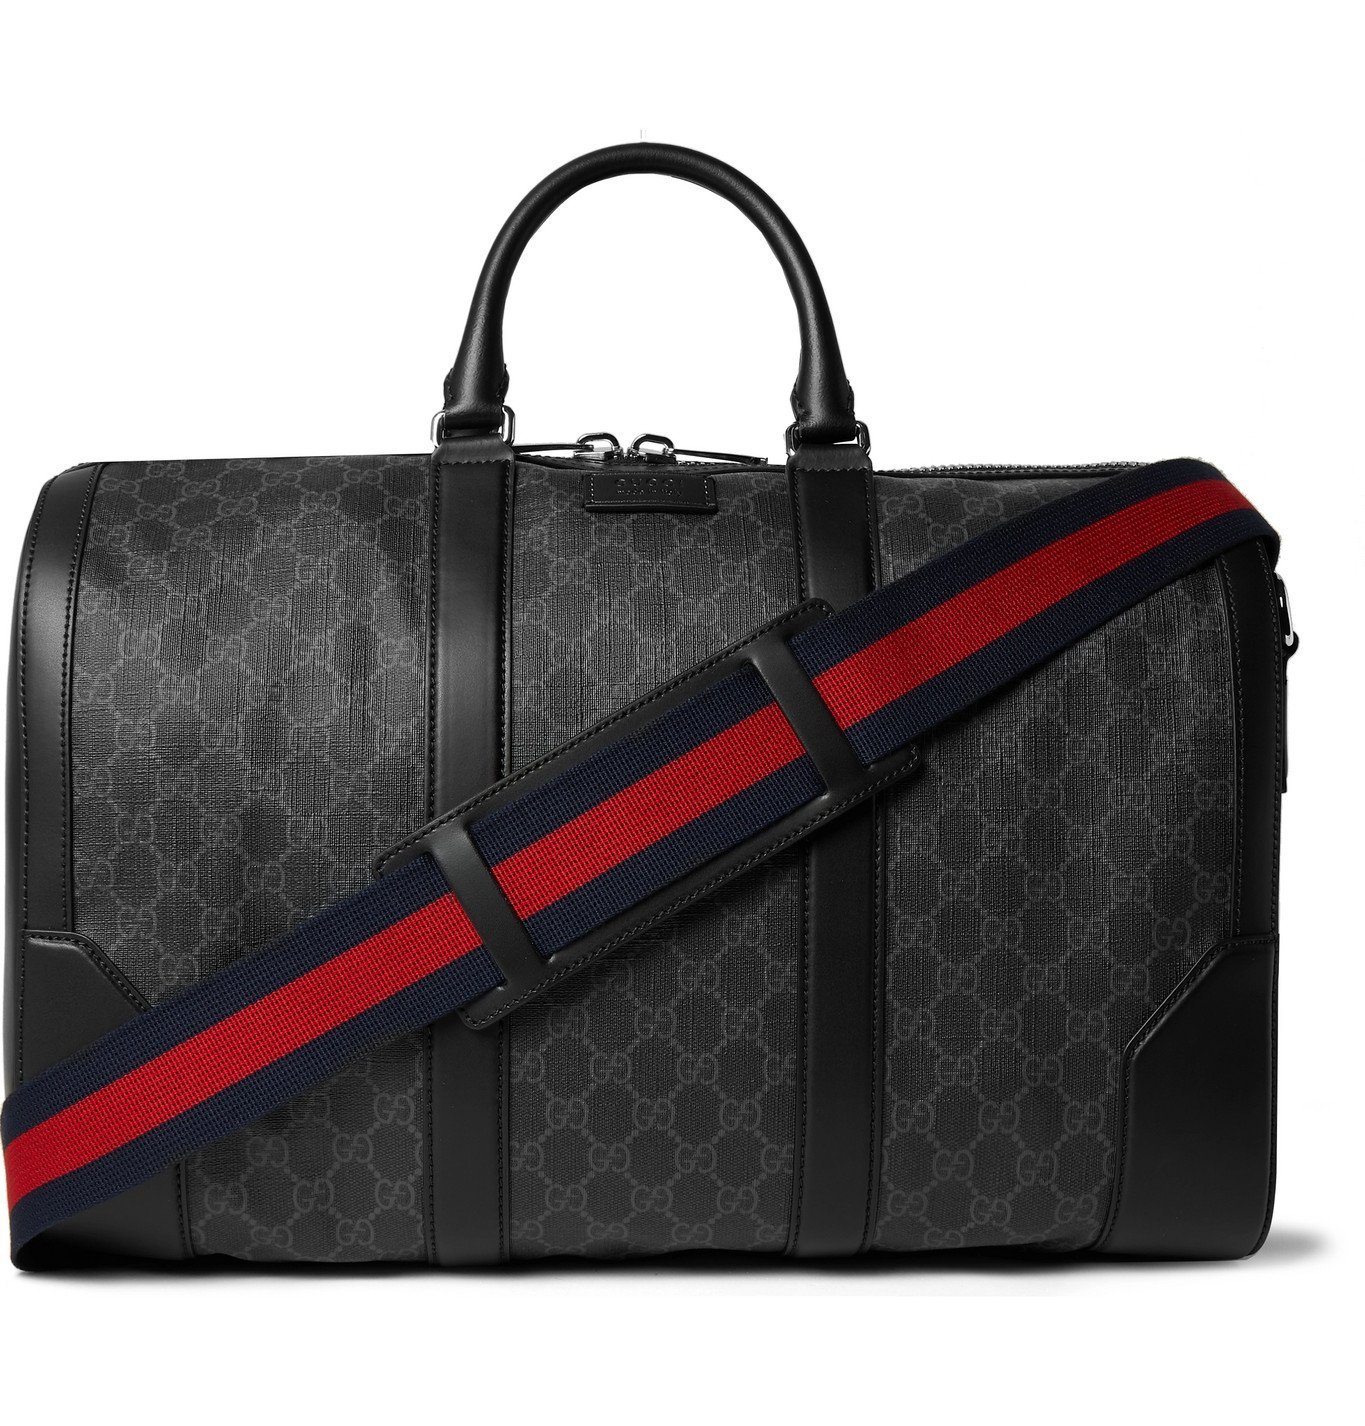 Gucci - Leather-Trimmed Monogrammed Coated-Canvas Holdall - Black Gucci